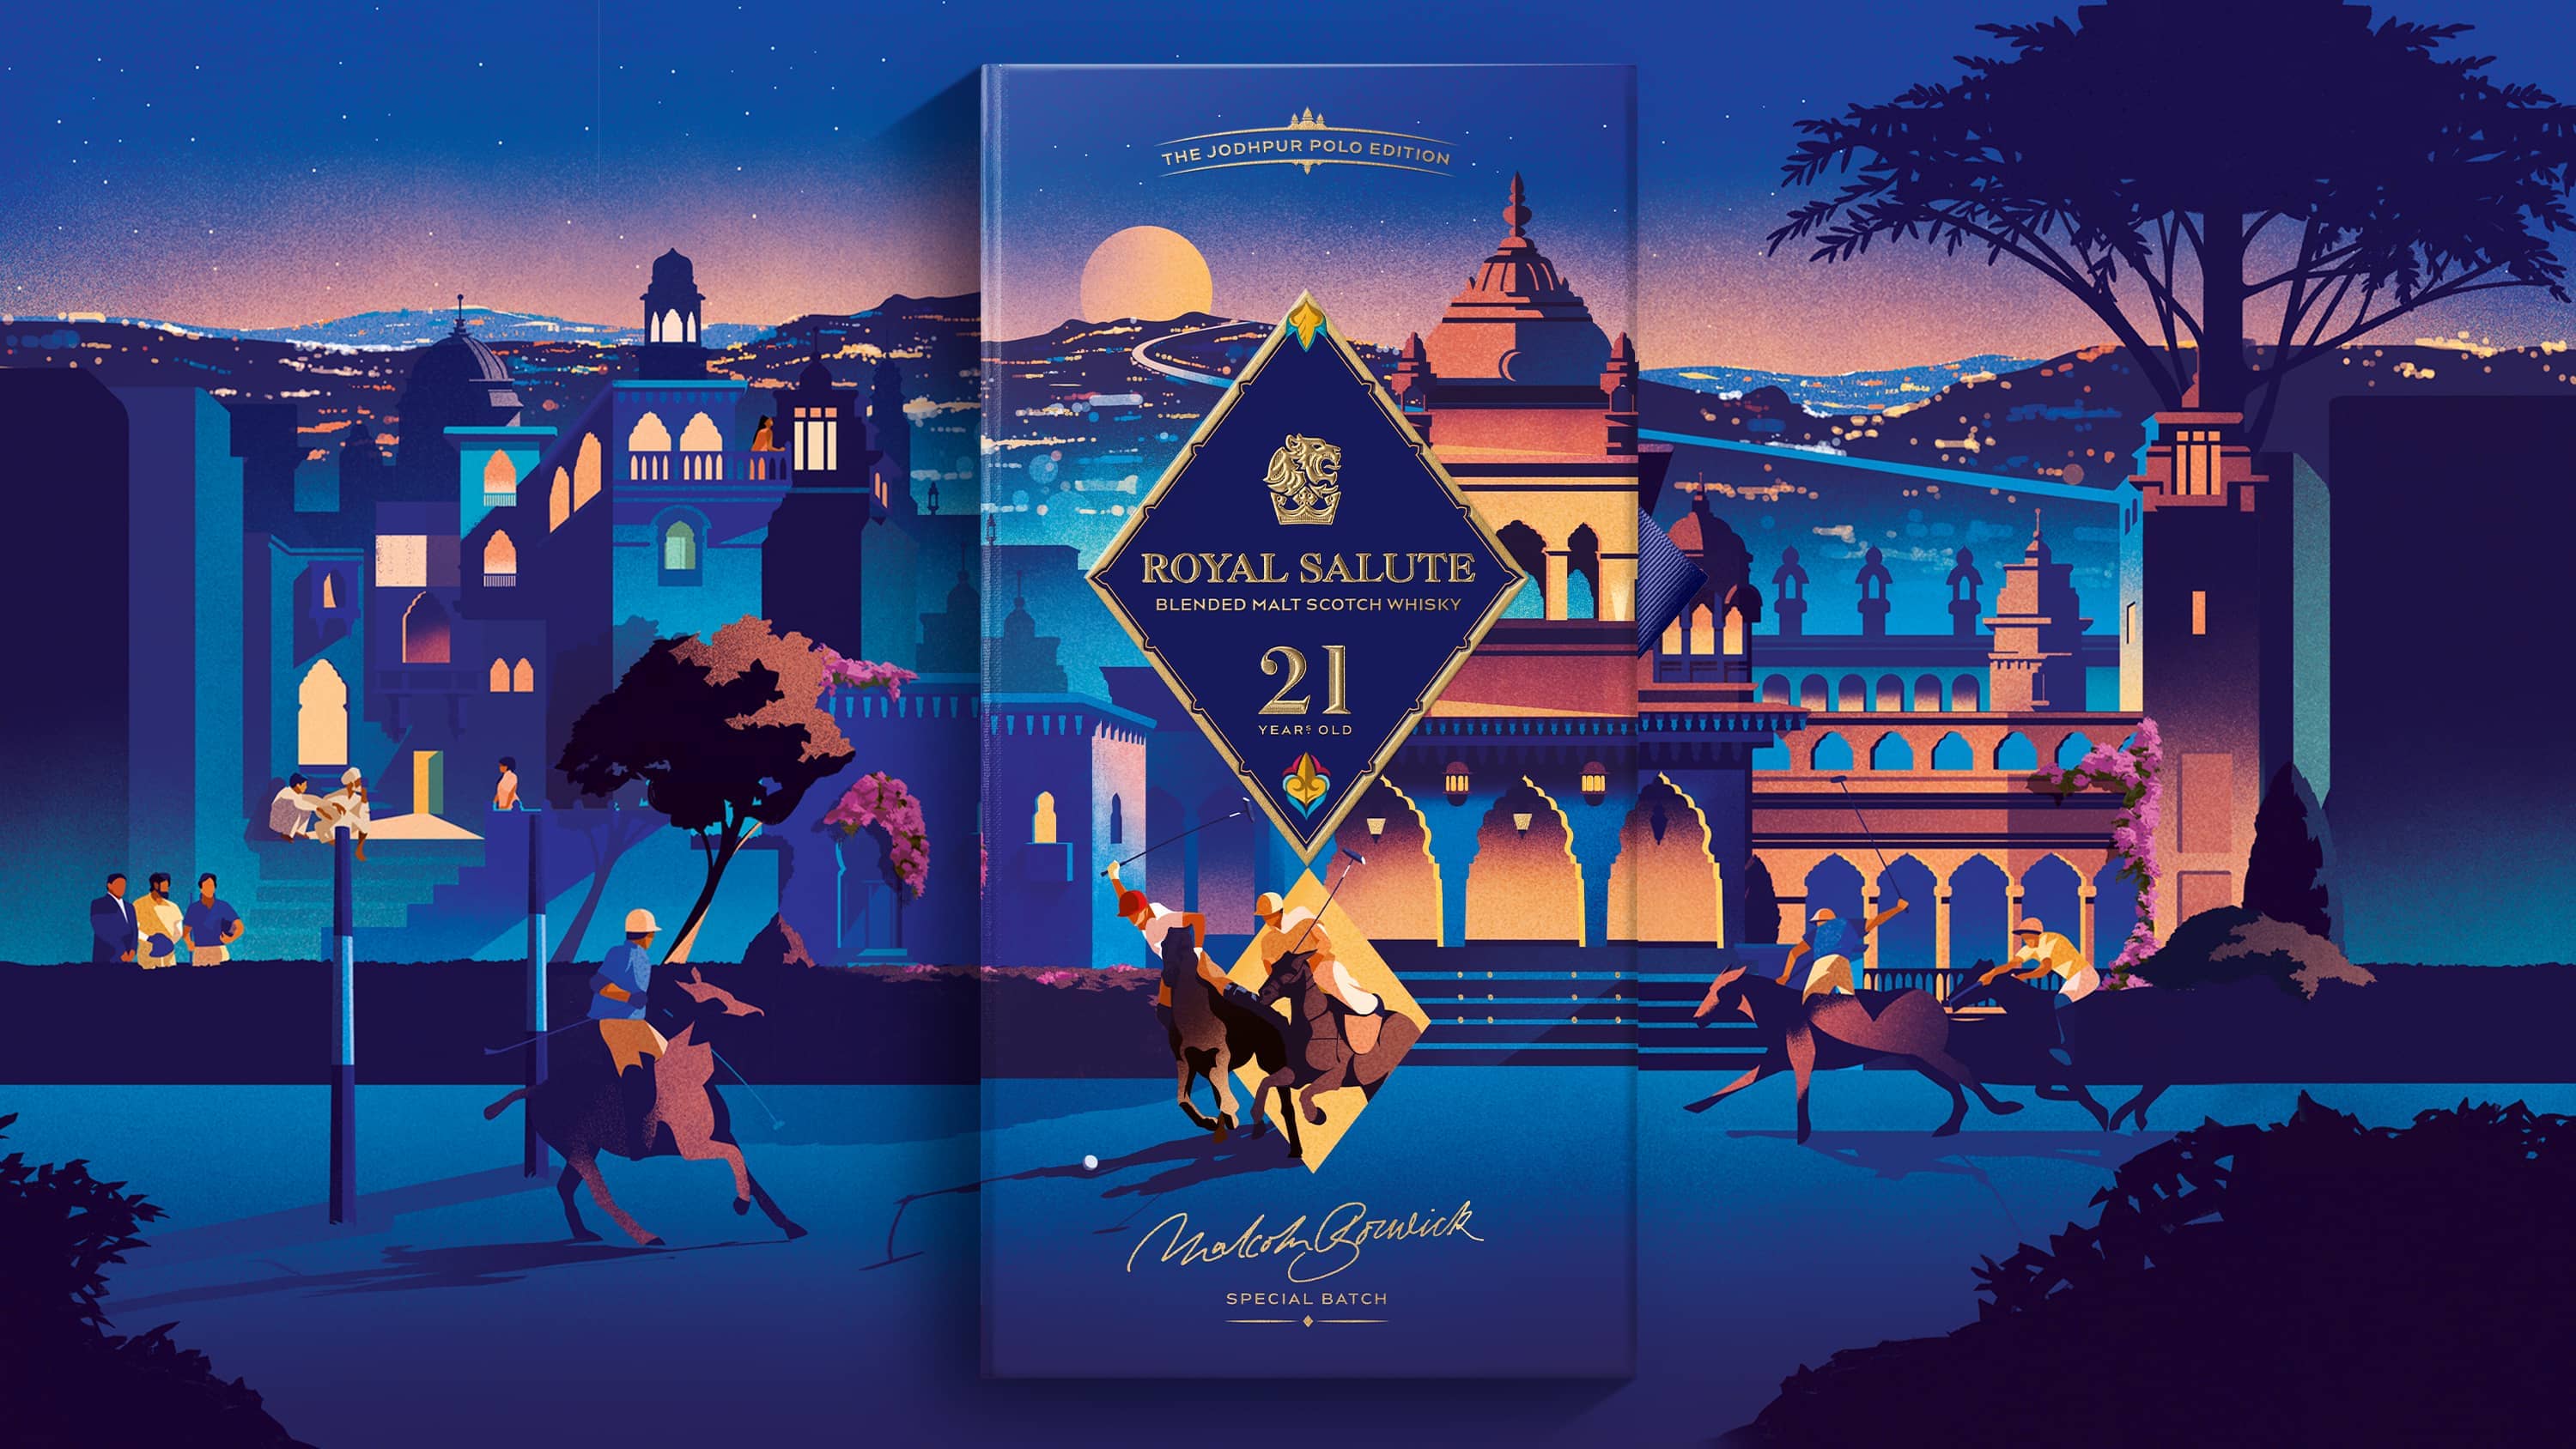 Royal Salute 21 Year Old Jodhpur Polo Edition – A Masterpiece in Illustration and Packaging Design